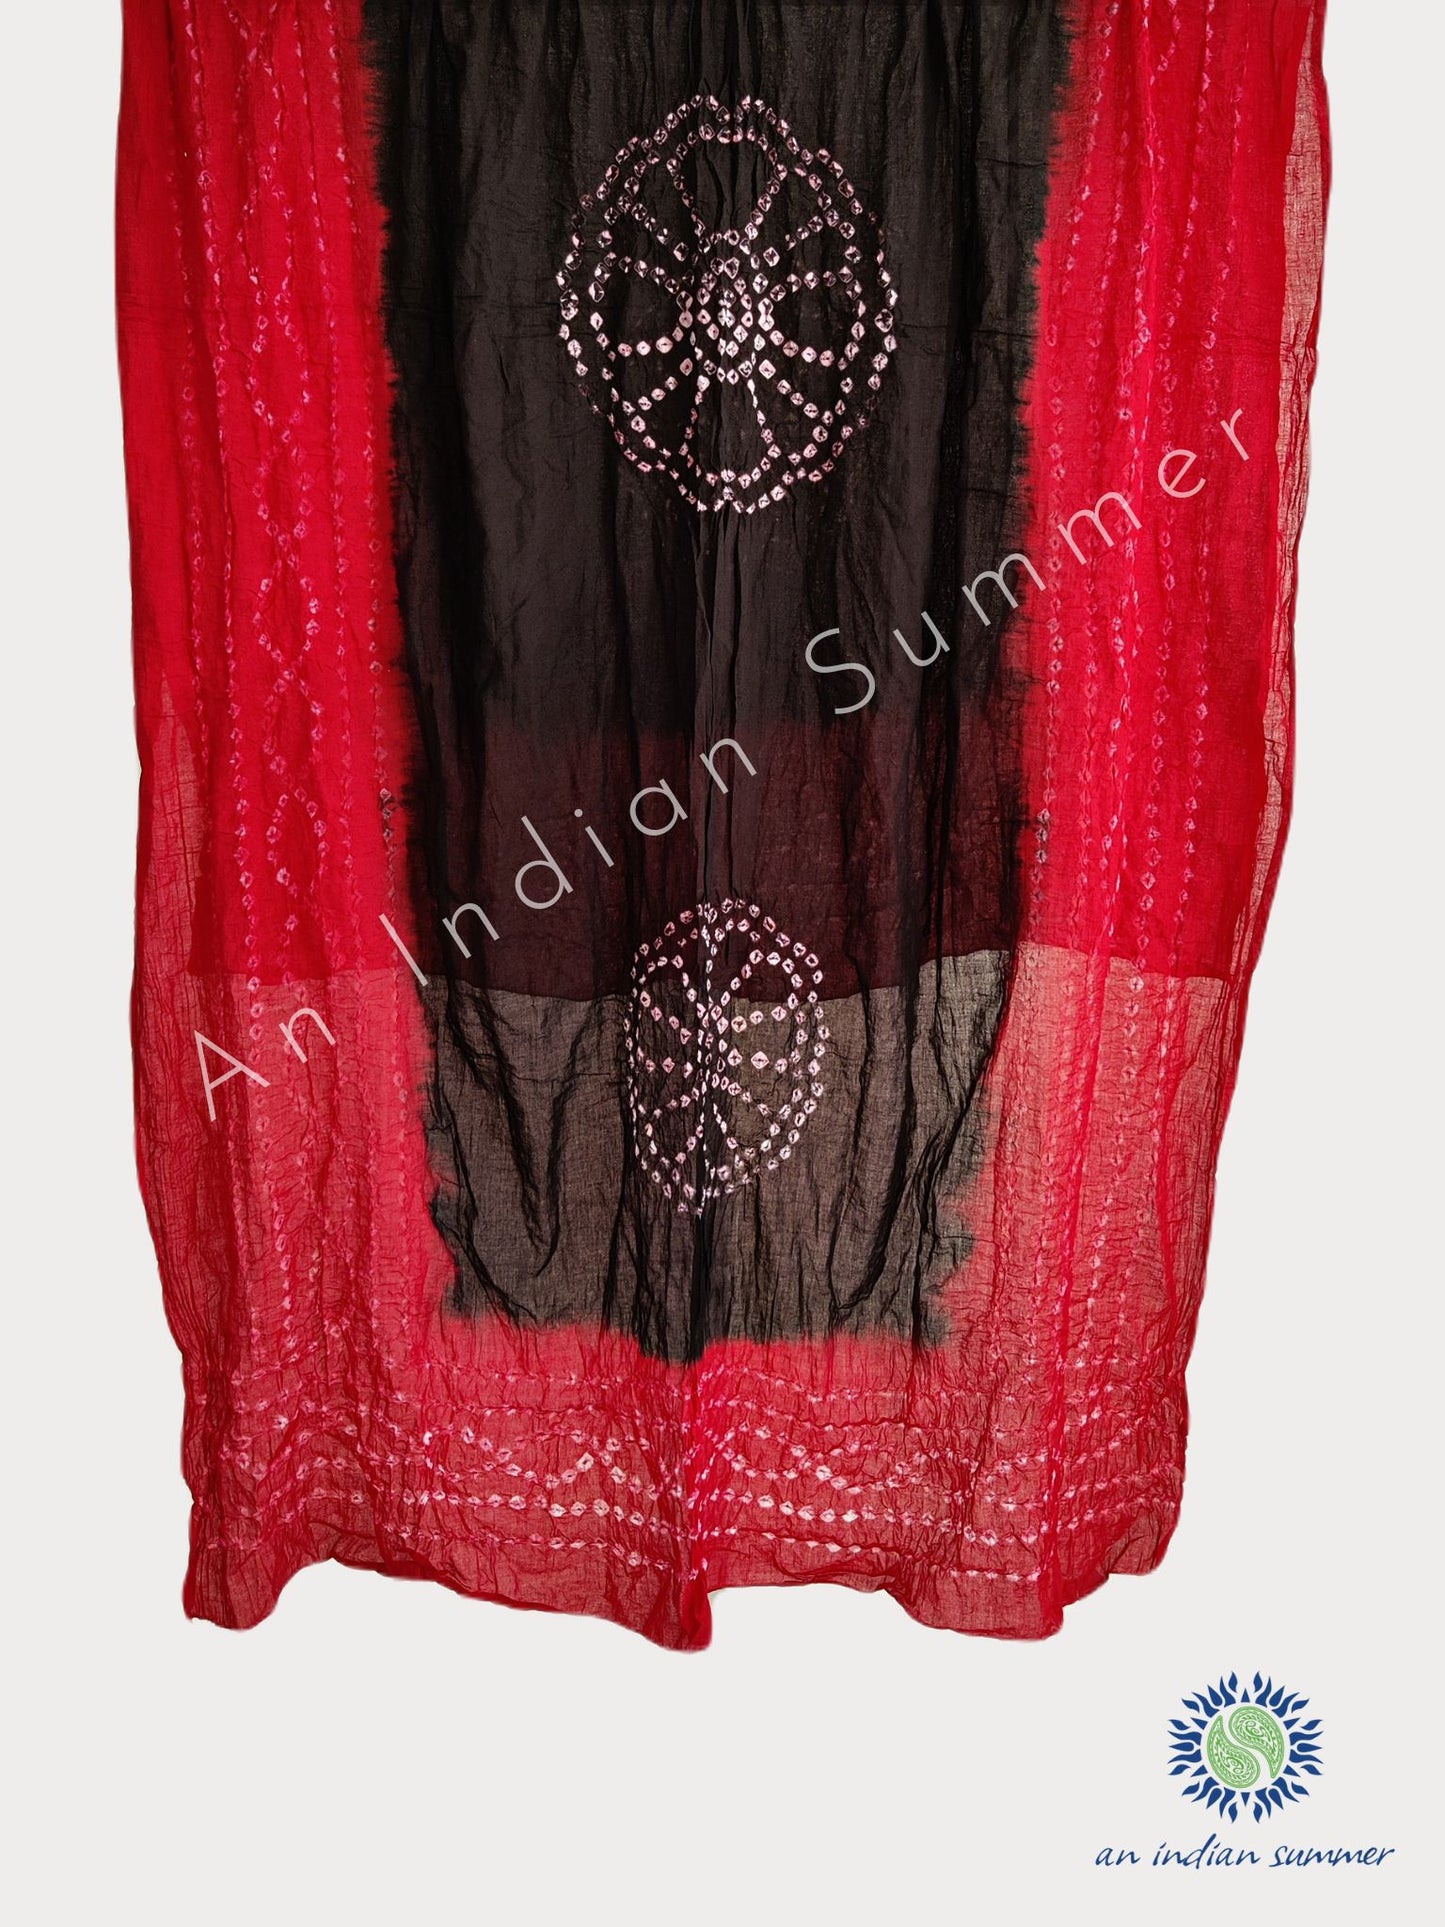 Black & Red | Contrast Bandhani Sarongs Pareos Shawls | Bandhej Tie Dye | Hand Tie-Dyed | Cotton Voile | An Indian Summer | Seasonless Timeless Sustainable Ethical Authentic Artisan Conscious Clothing Lifestyle Brand